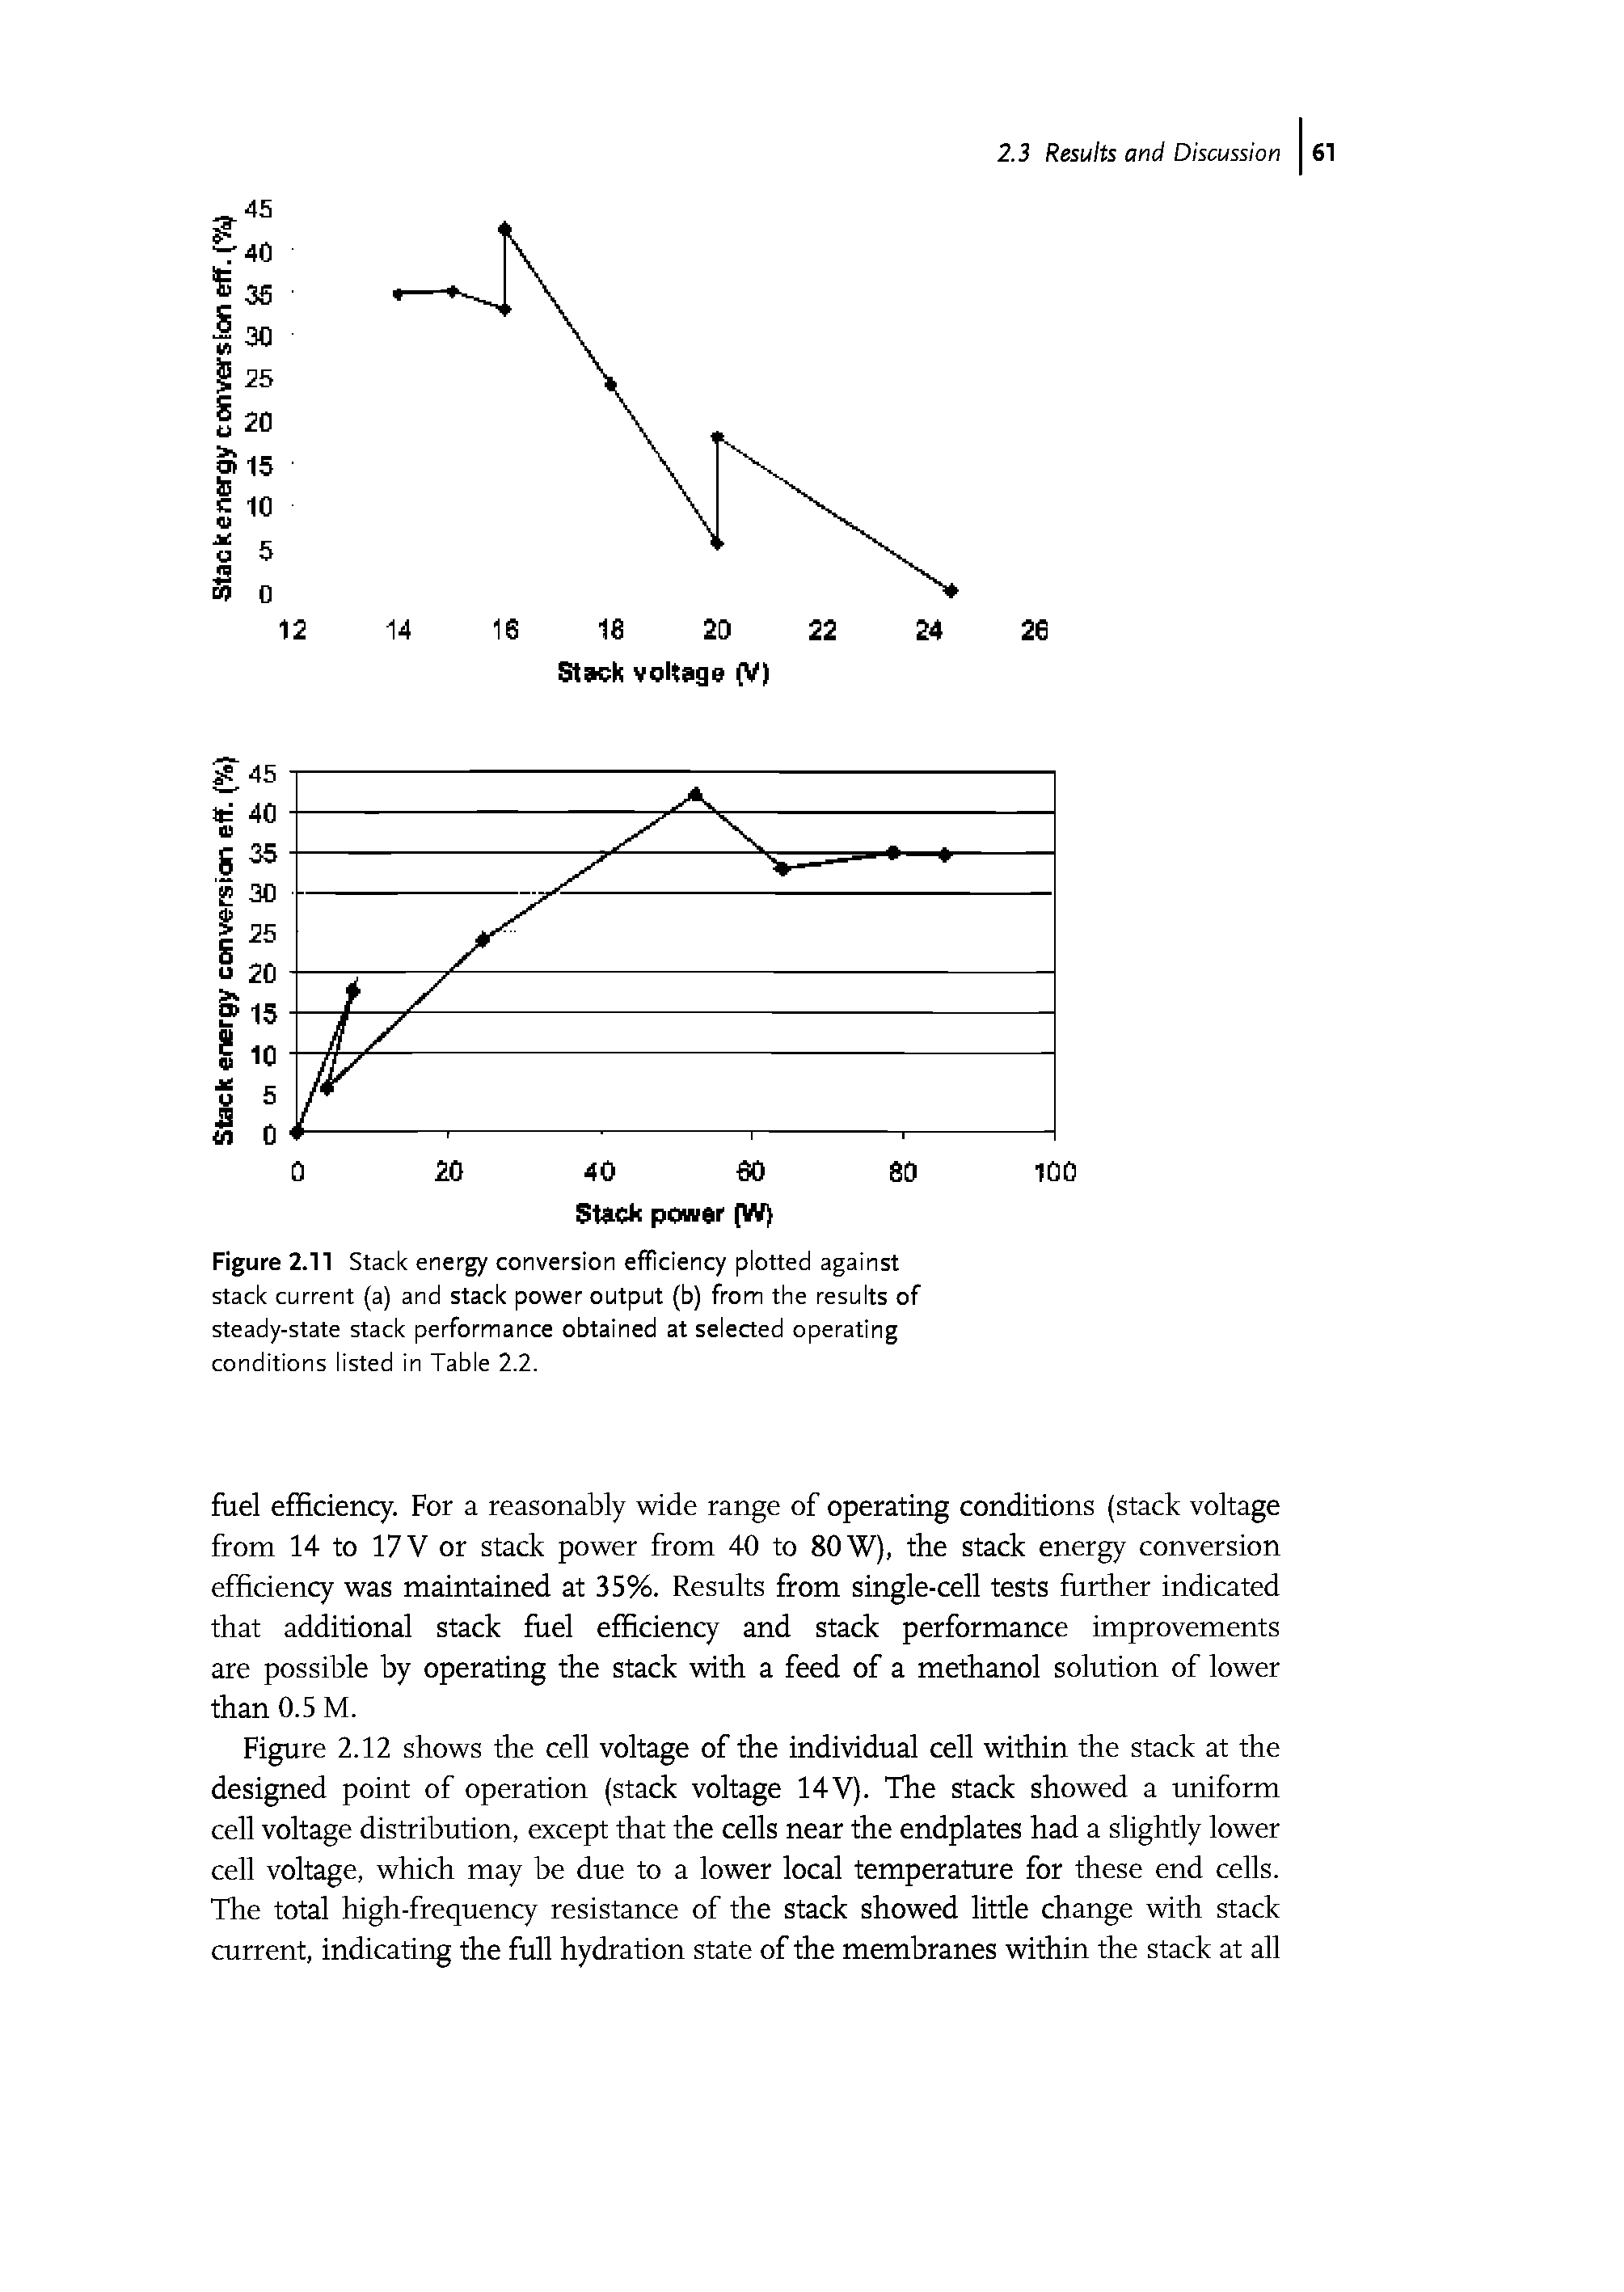 Figure 2.11 Stack energy conversion efficiency plotted against stack current (a) and stack power output (b) from the results of steady-state stack performance obtained at selected operating conditions listed in Table 2.2.